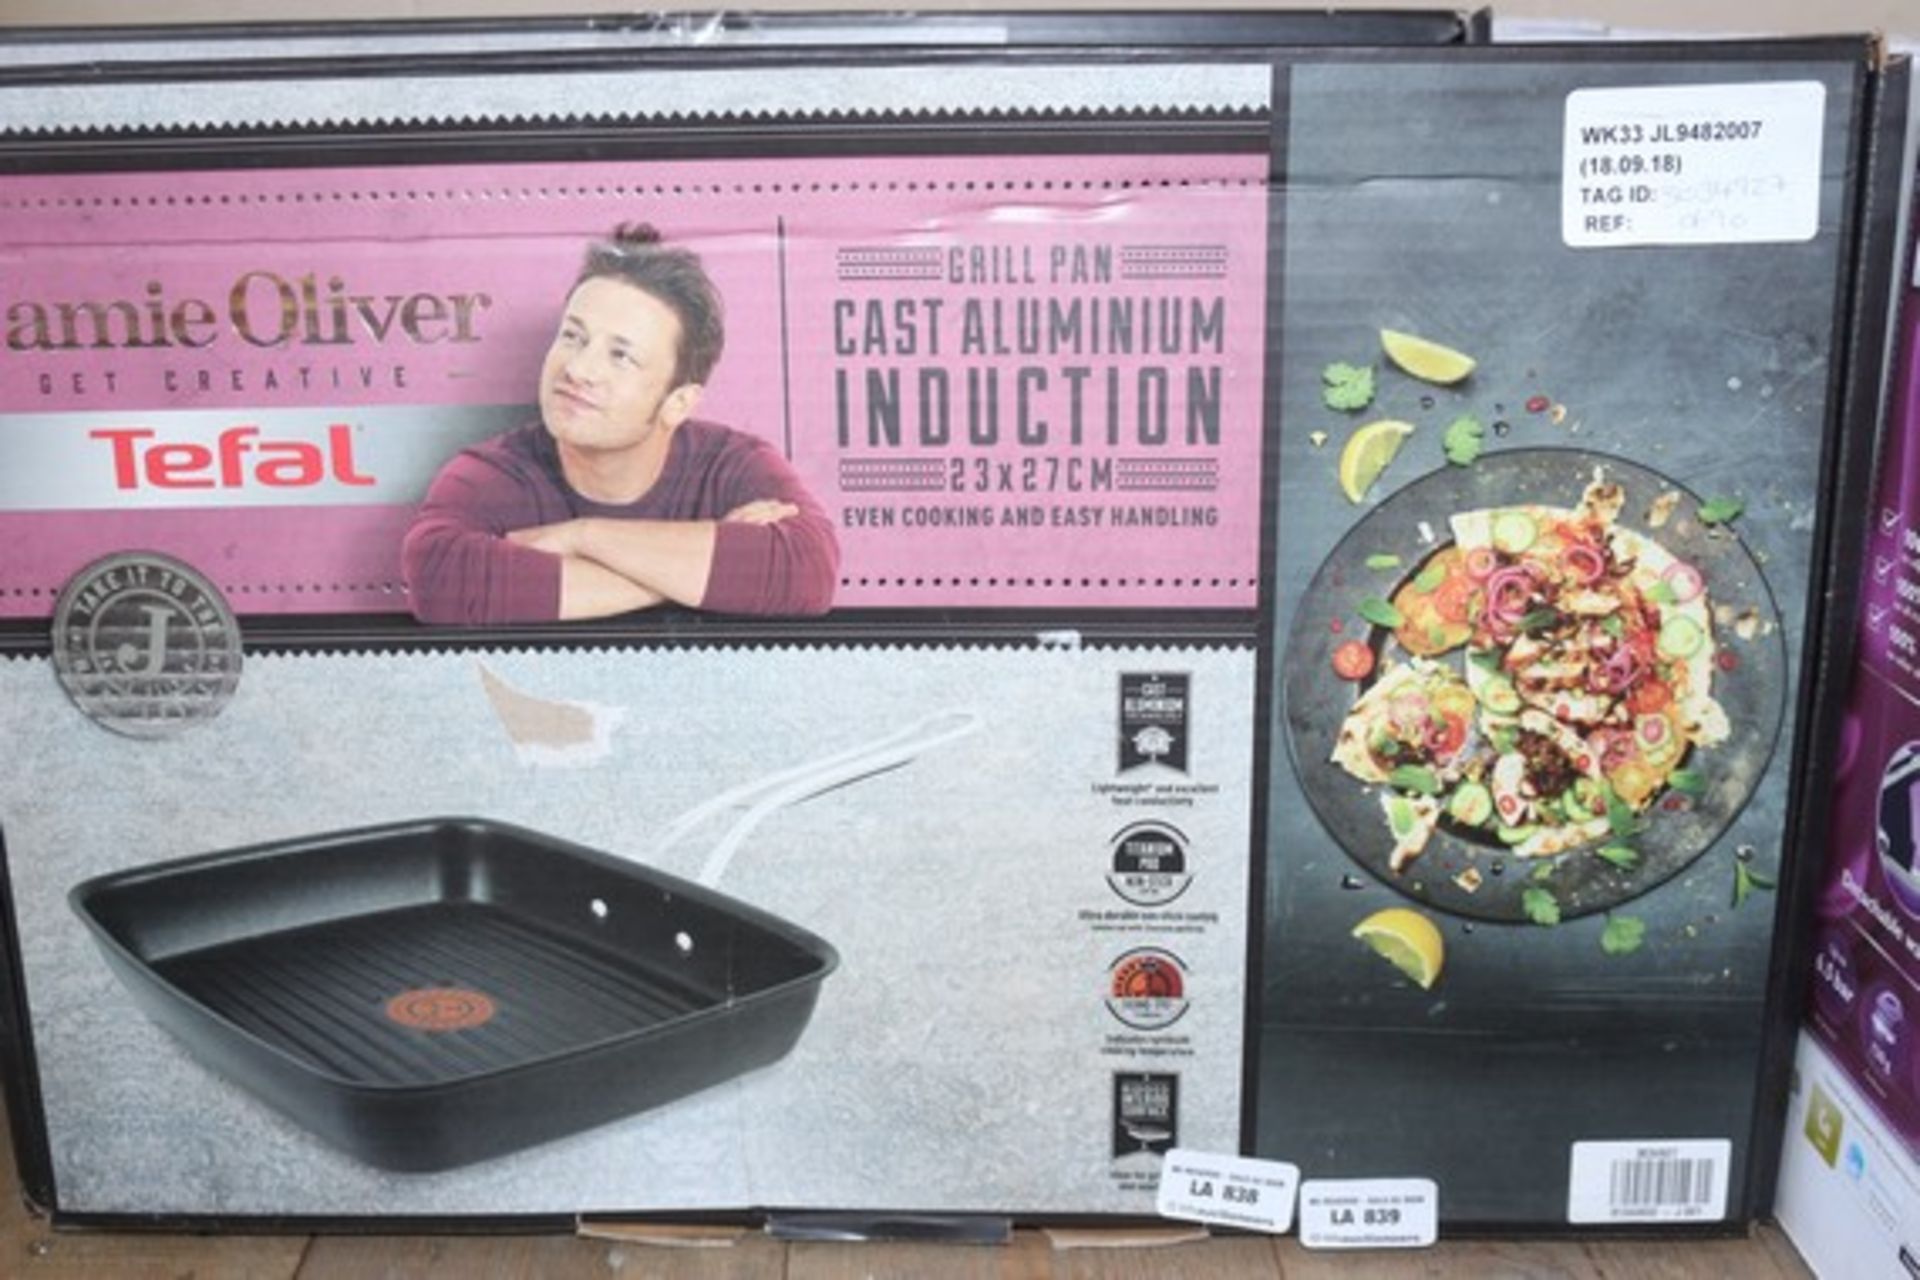 1 x JAMIE OLIVER TEFAL GRILL PAN RRP £70 (18.09.18) *PLEASE NOTE THAT THE BID PRICE IS MULTIPLIED BY